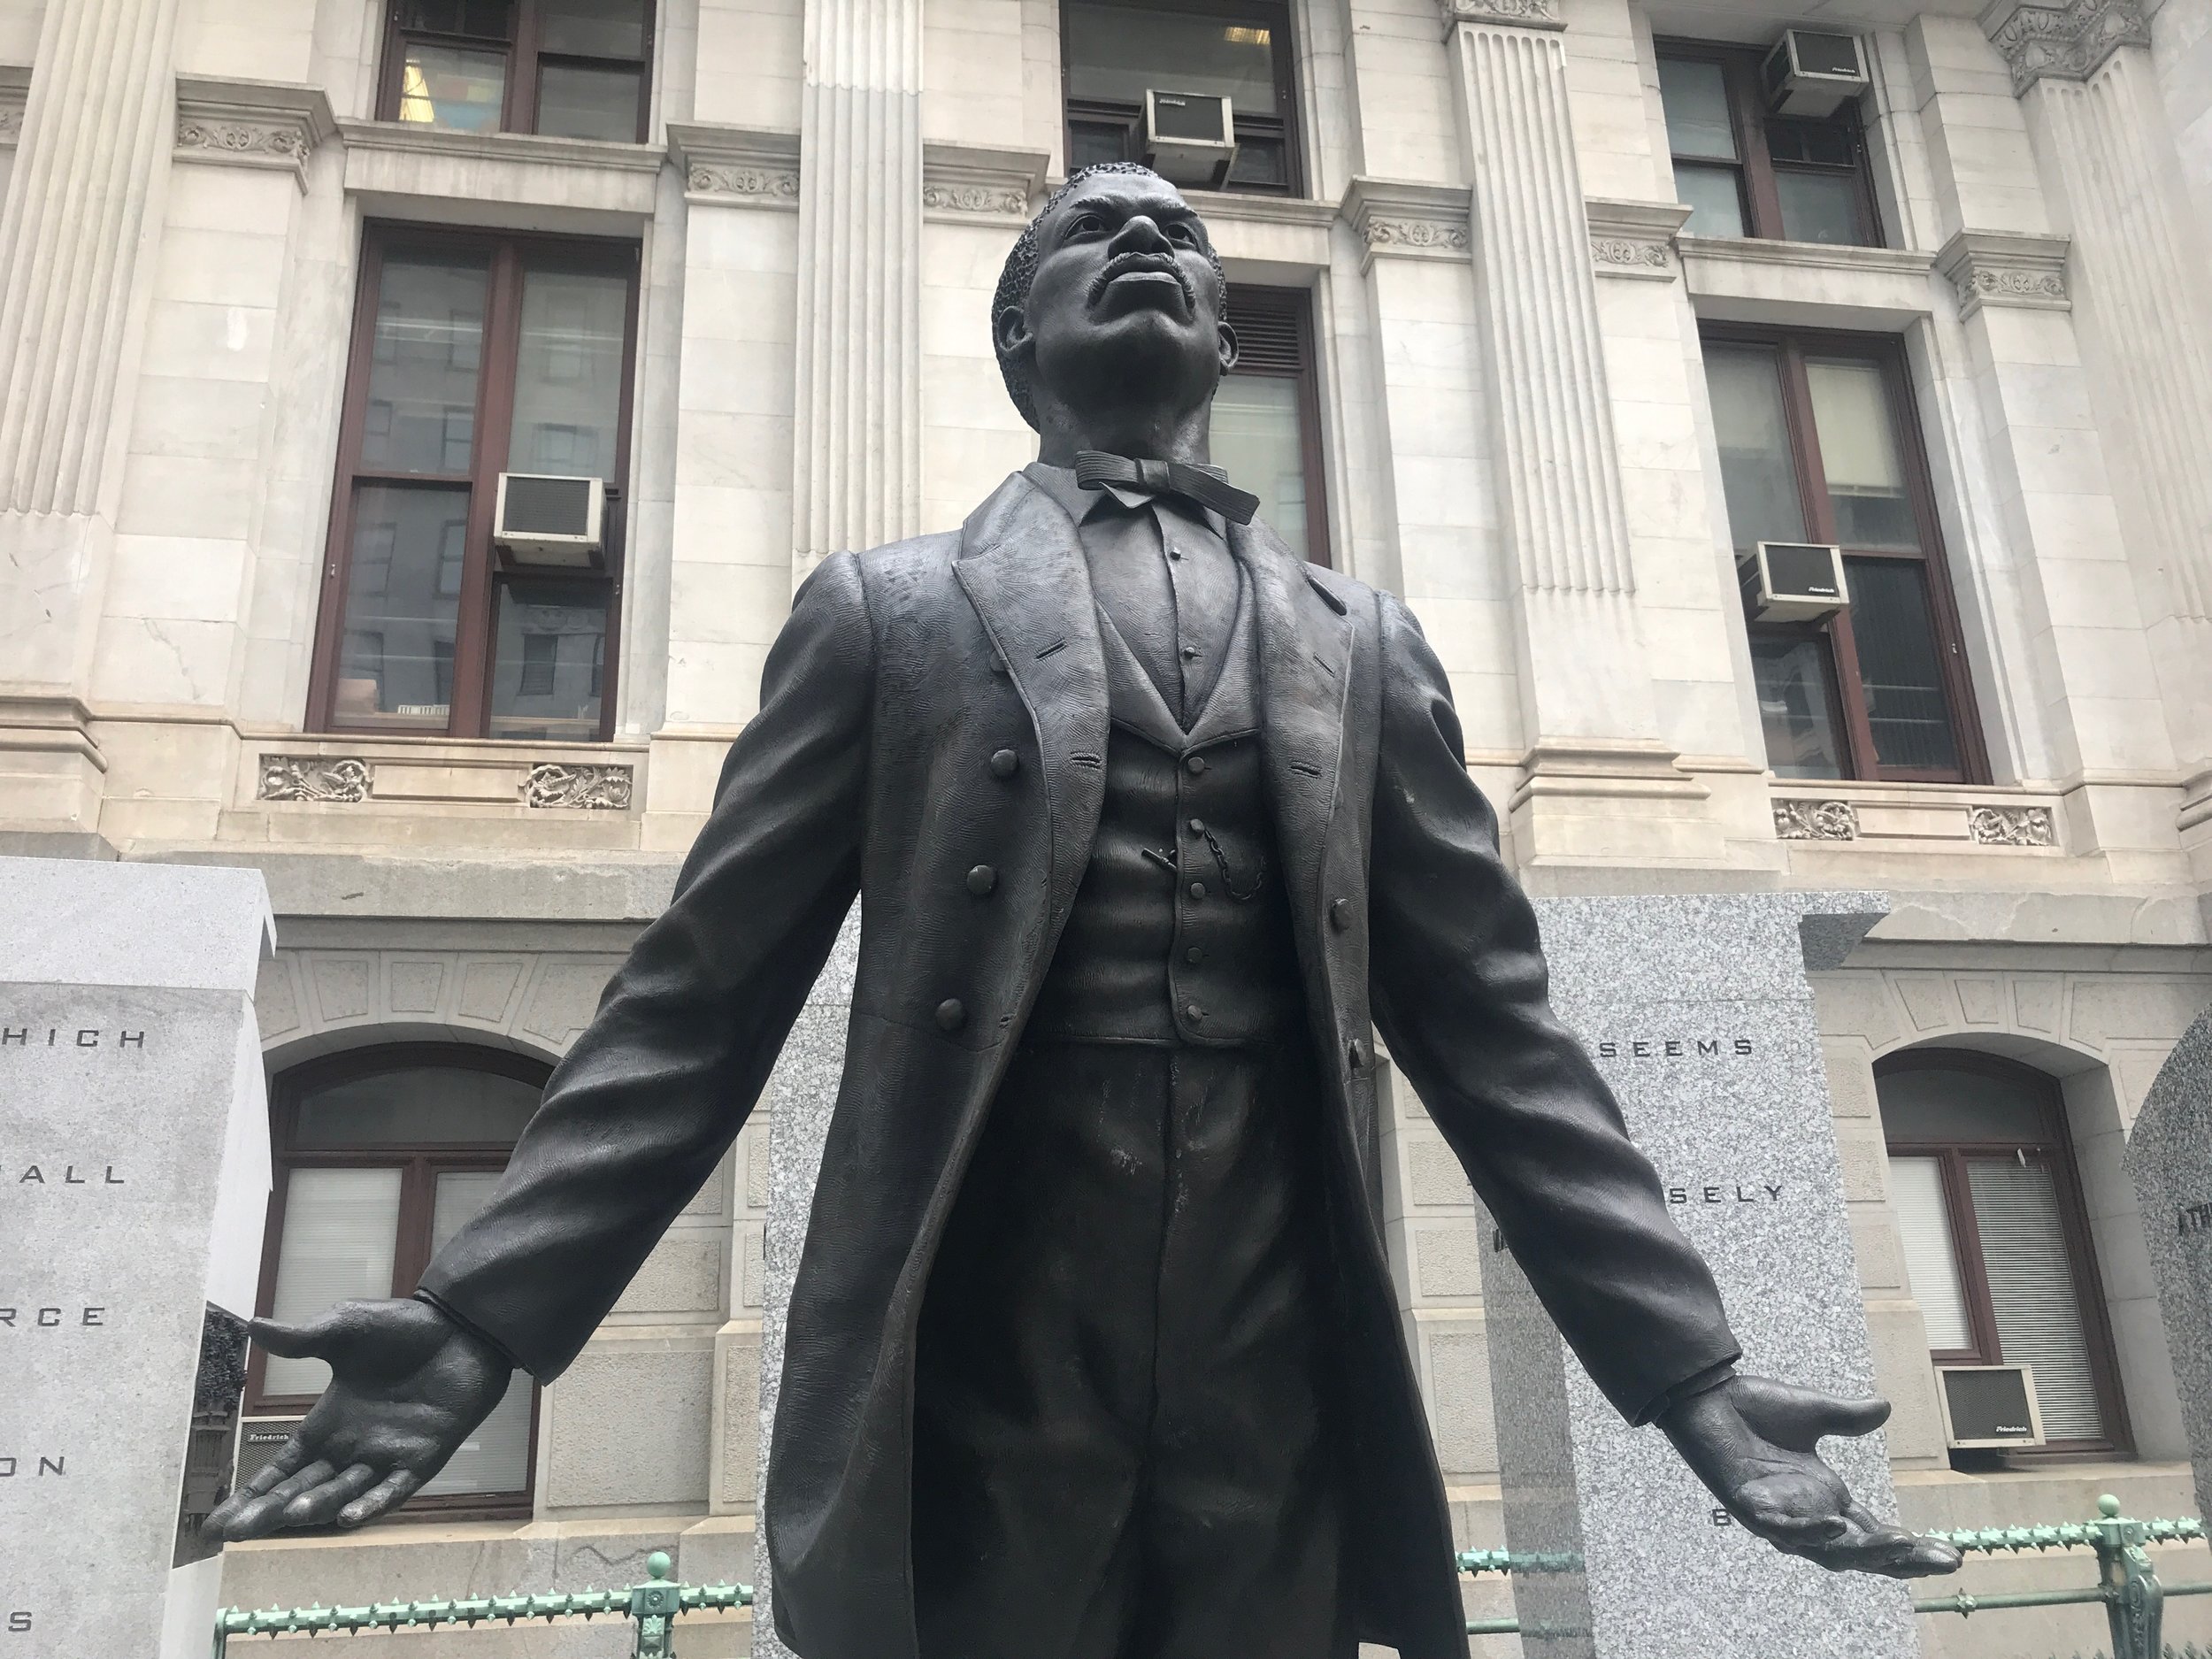  The new statue outside Philadelphia City Hall memorializes Octavius Catto, a civil rights activist who desegregated baseball a century before Jackie Robinson, refused to leave his seat on a trolley a century before Rosa Parks and was assassinated a 